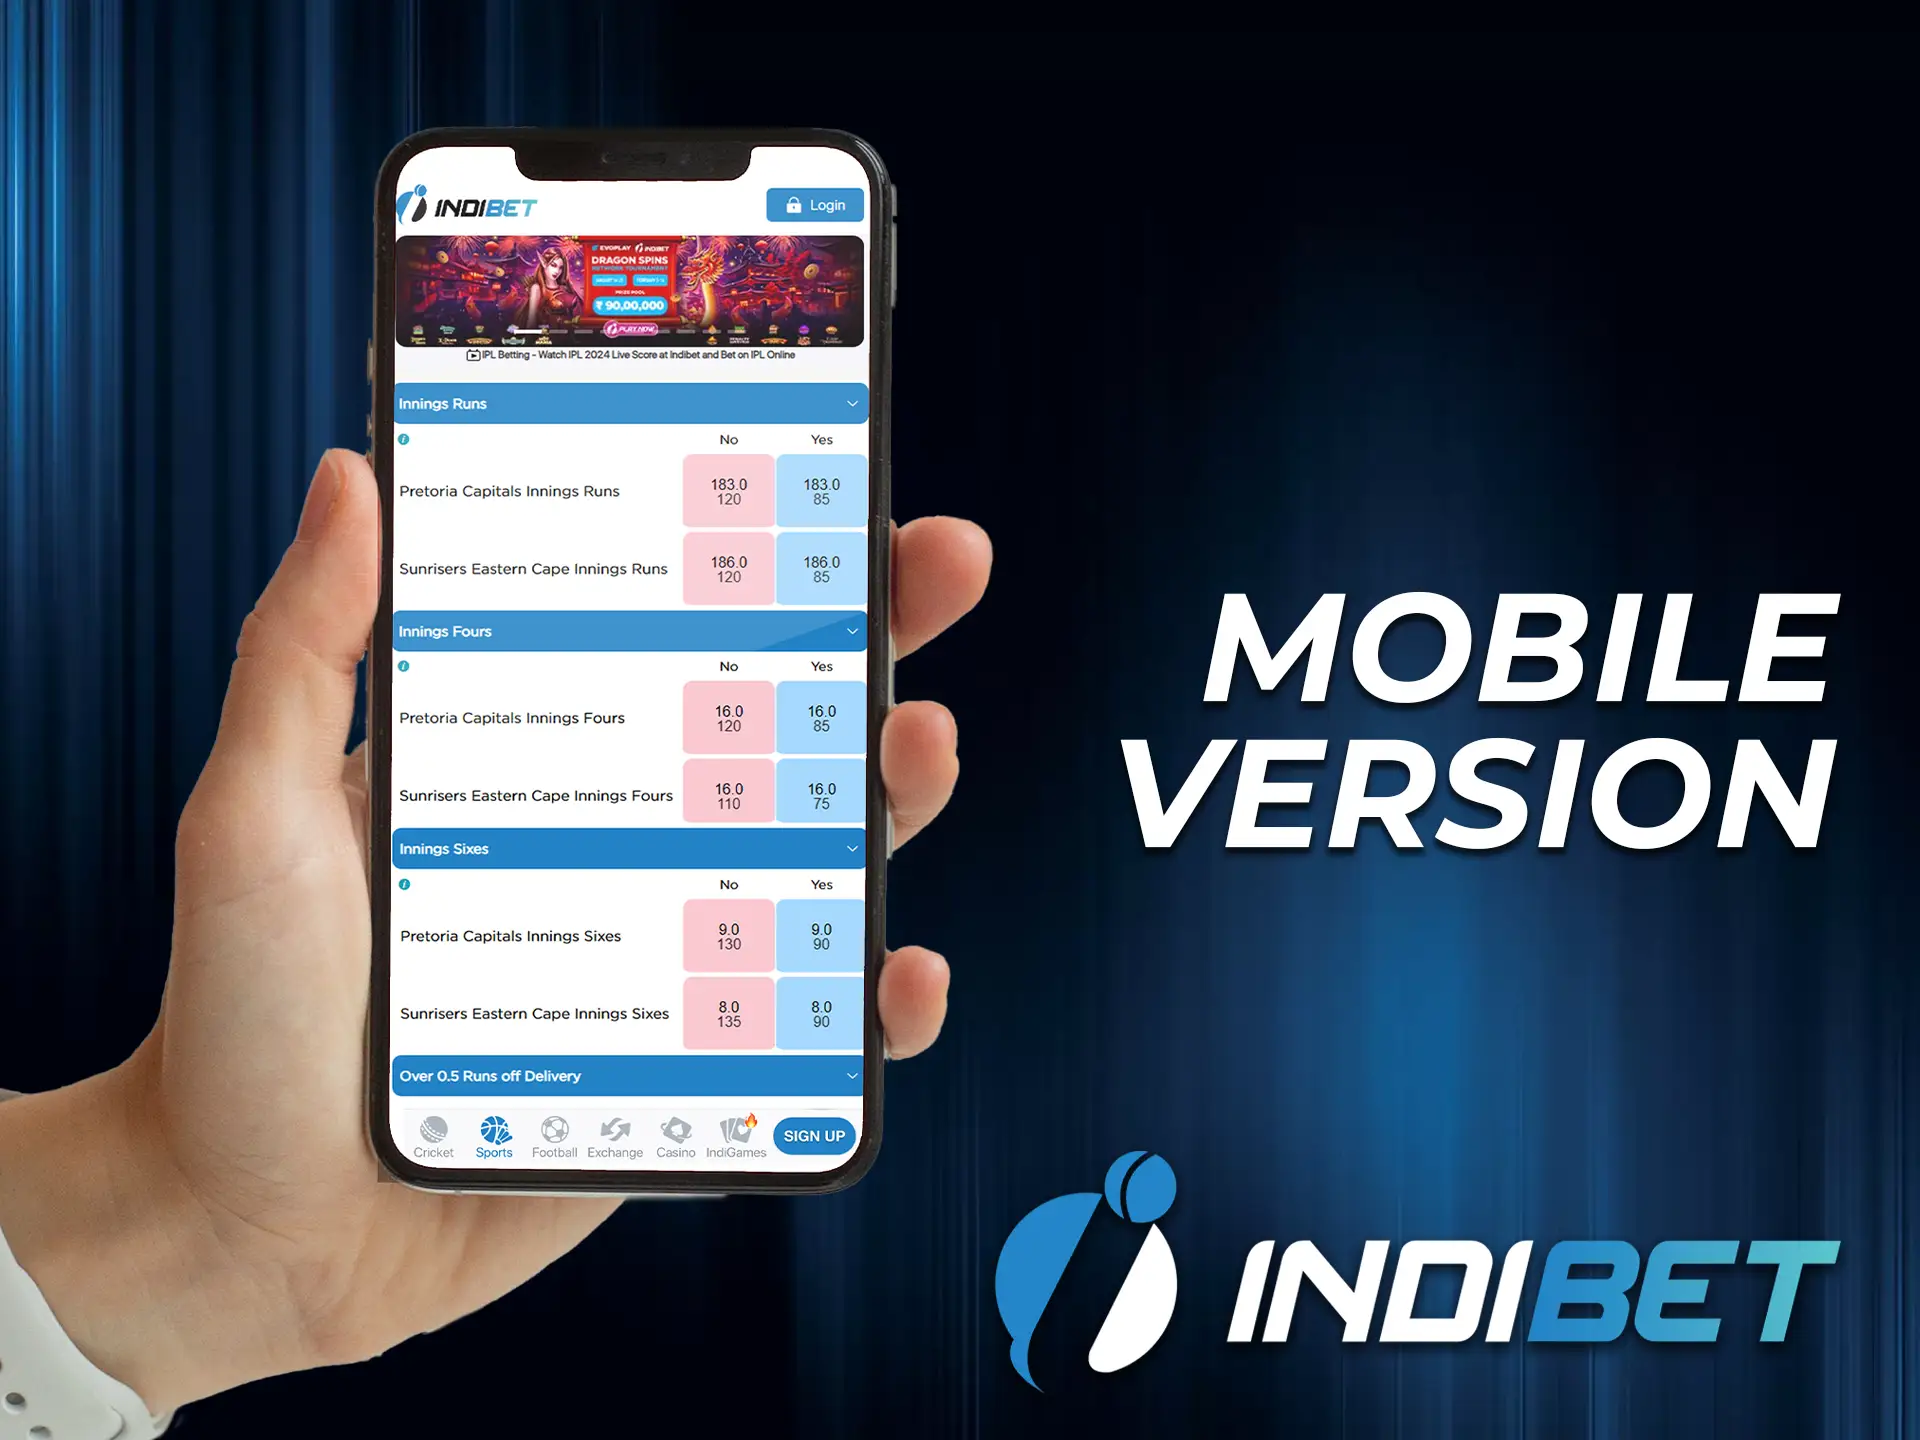 Indibet's mobile site has a simplified and user-friendly interface, but is no different in variety from the desktop site.